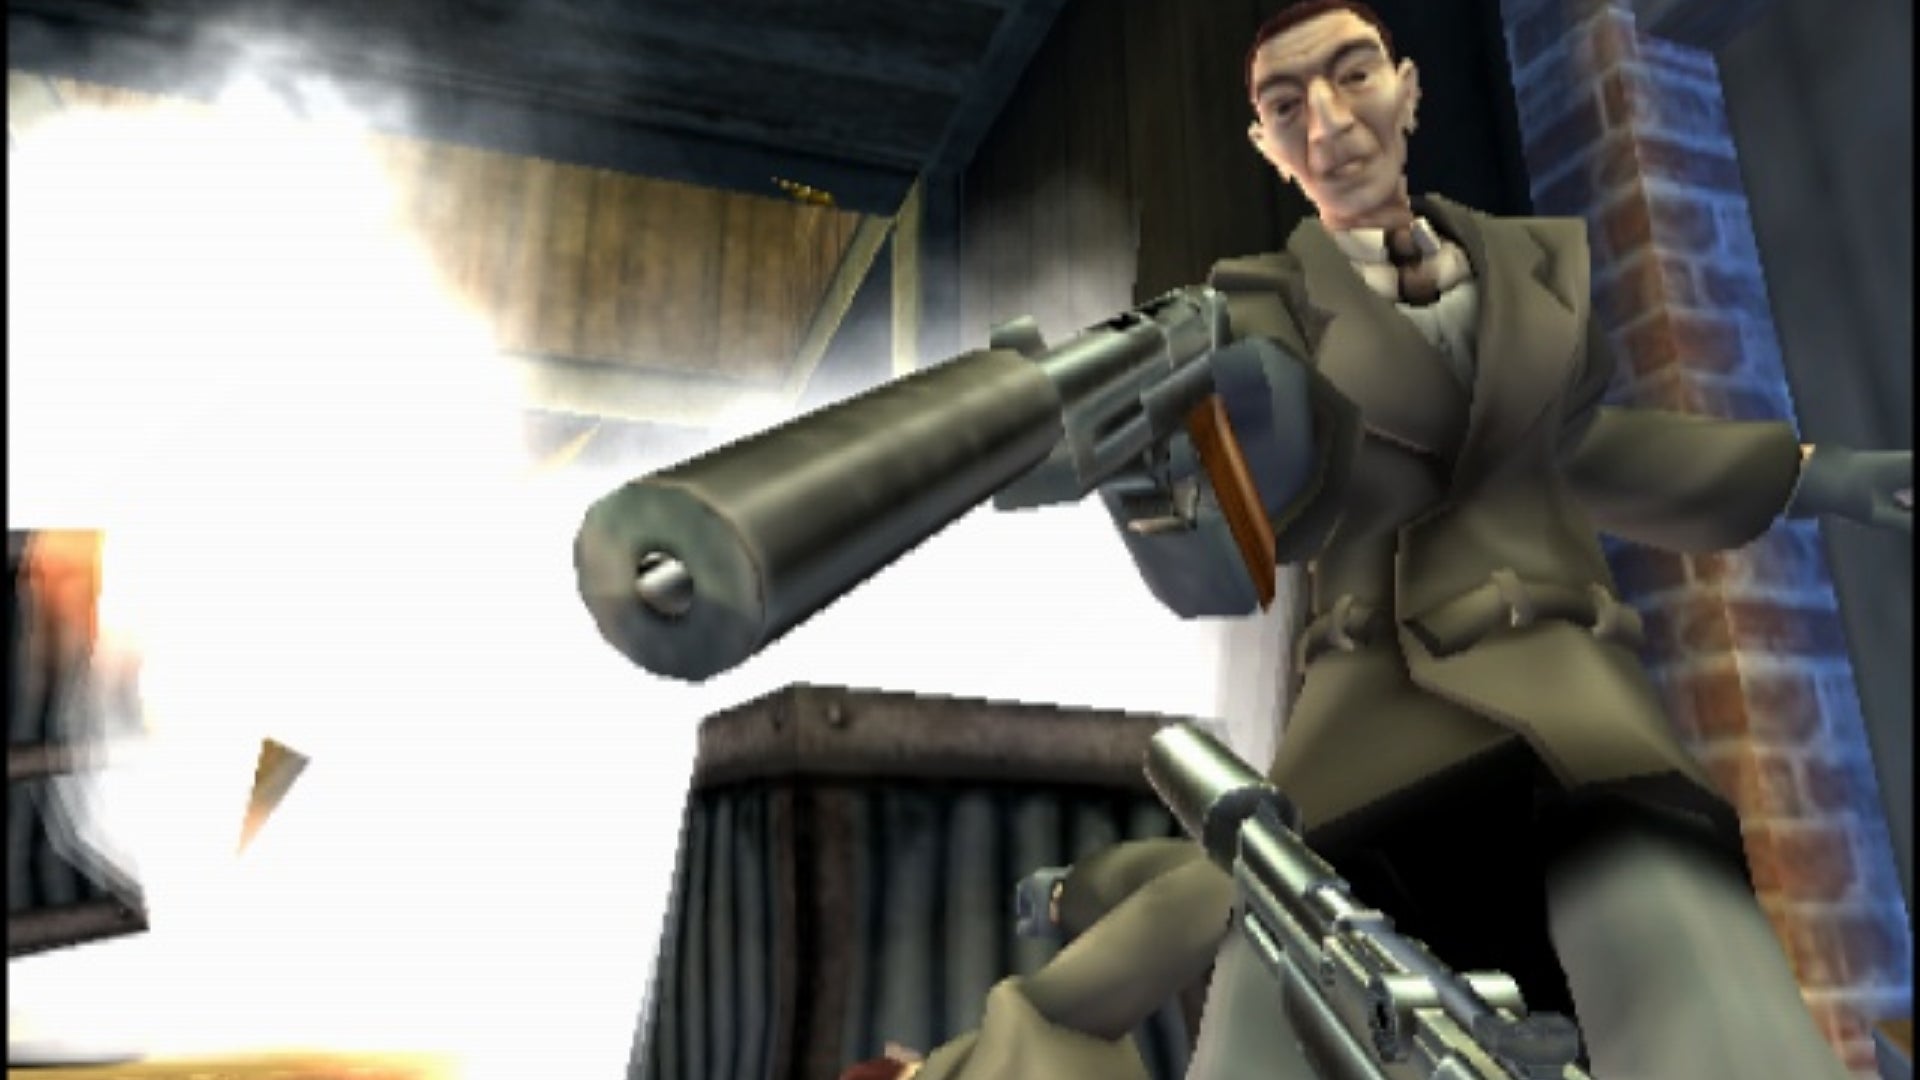 A character has a gun pointed at them in TimeSplitters 2